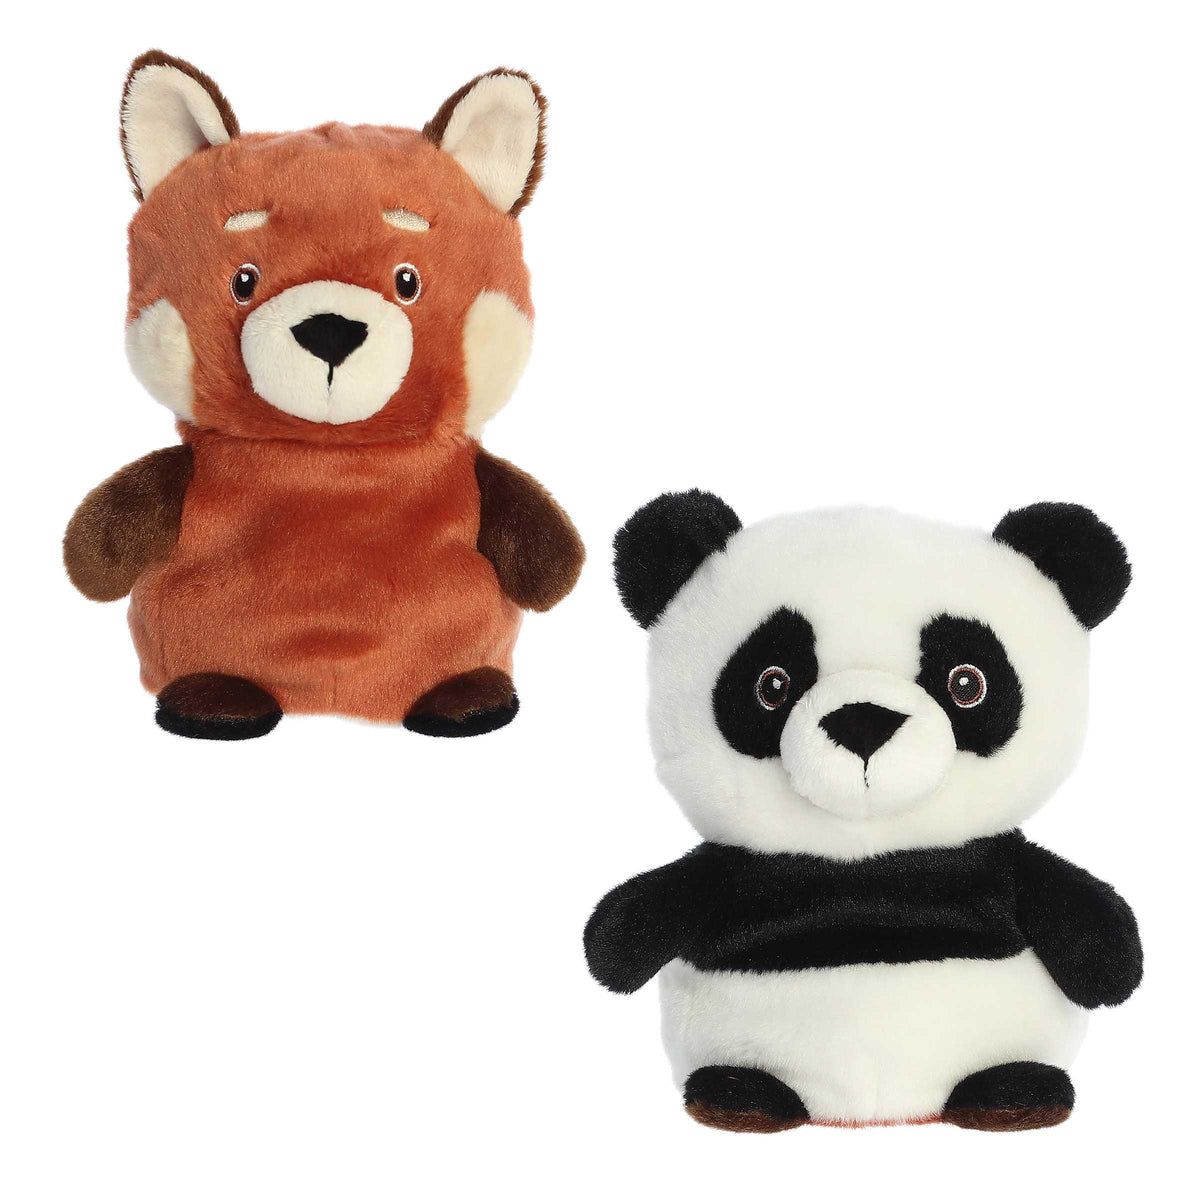 Reversible Eco Red Panda plush and black and white Panda Plush, an eco-conscious toy made from recycled materials